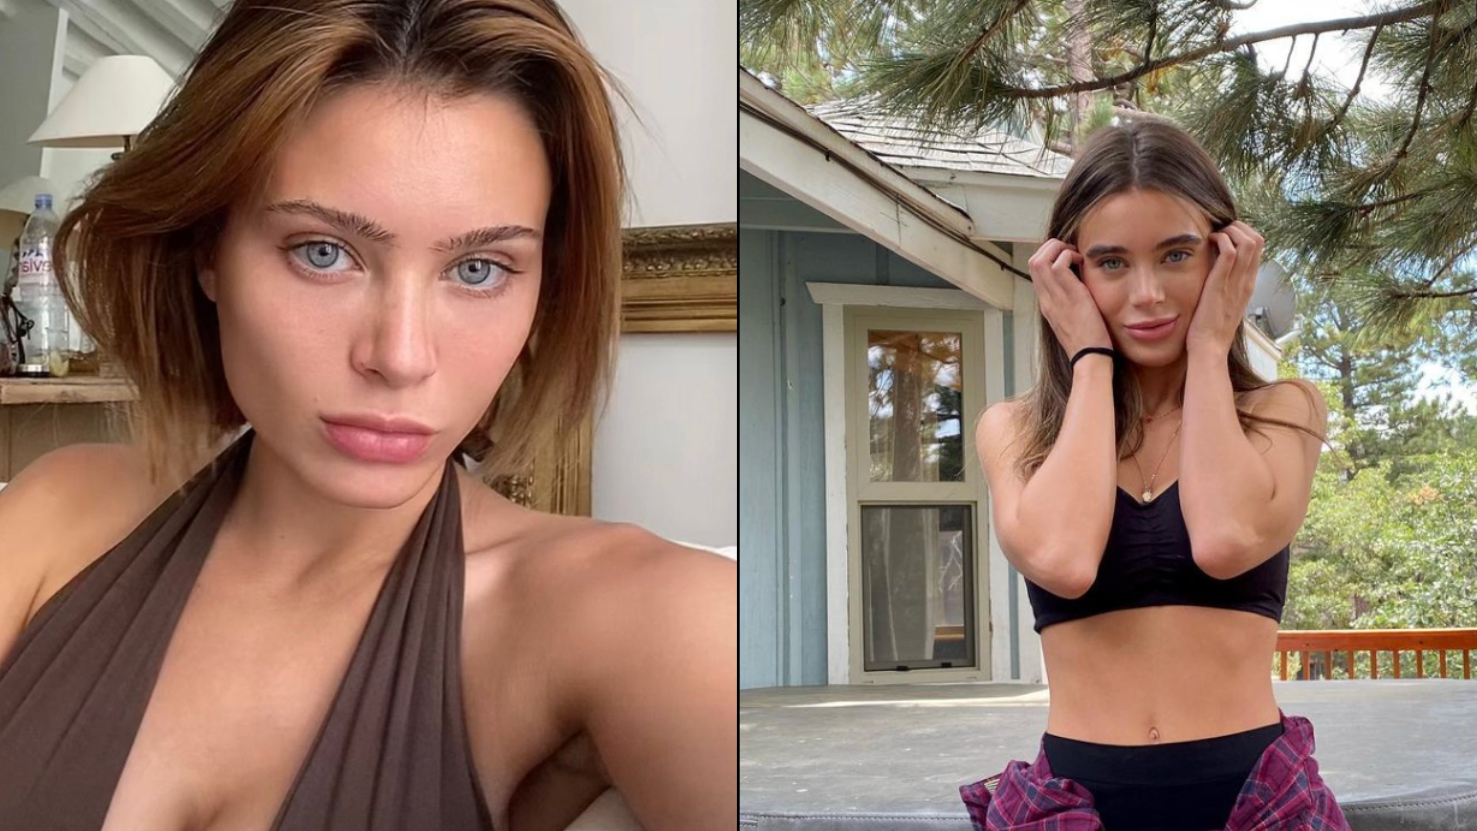 Lana Rhodes Forced - Lana Rhoades Says She Has 'Proof' We're Living In A Simulation